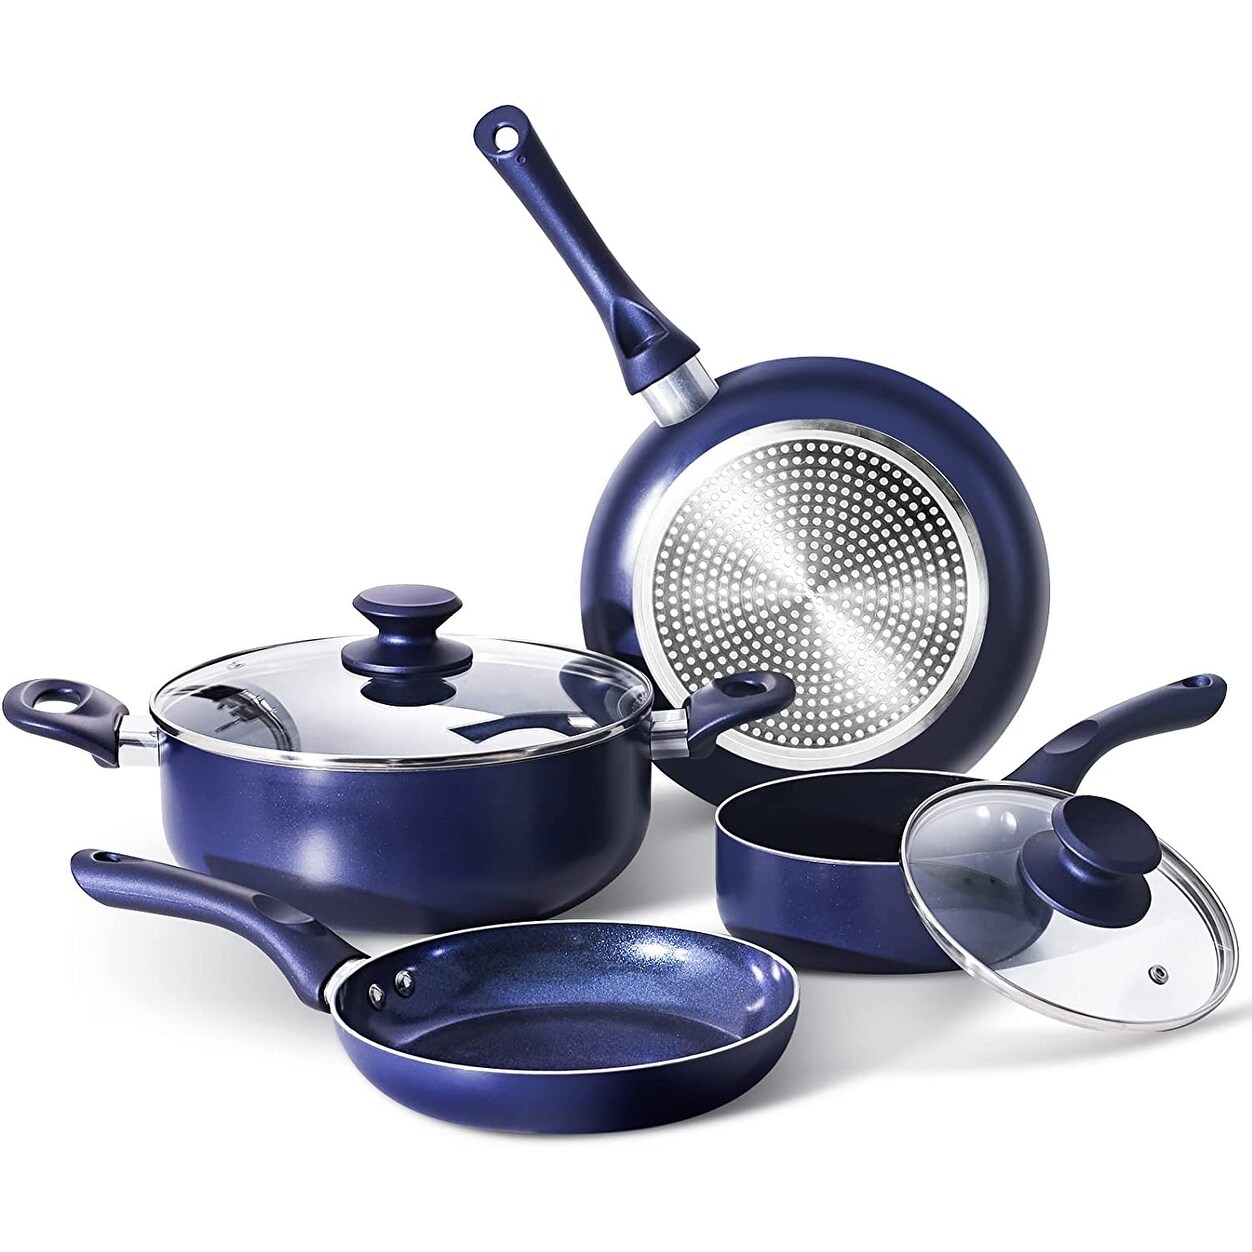 https://ak1.ostkcdn.com/images/products/is/images/direct/0176b136514edaa9bbff846479d591e2dac57e3d/6-piece-Non-stick-Cookware-Set-Pots-and-Pans-Set-for-Cooking---Ceramic-Coating-Saucepan%2C-Stock-Pot-with-Lid%2C-Frying-Pan%2C-Copper.jpg